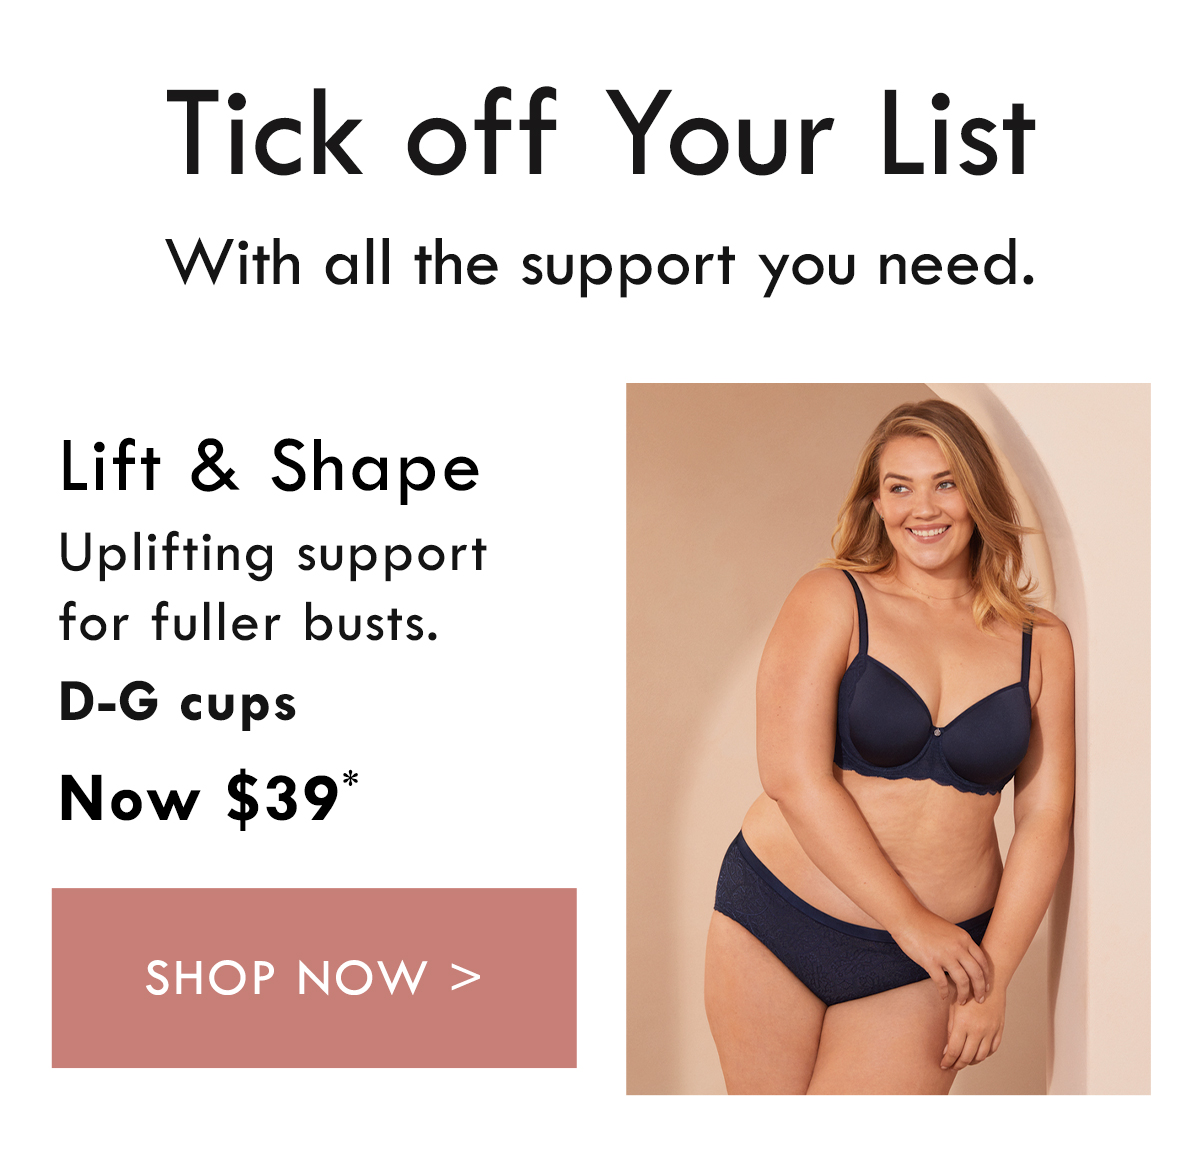 Tick off your list. With all the support you need. Lift and Shape. Uplifting support for fuller busts. D-G cups. Now $39. Shop Now.